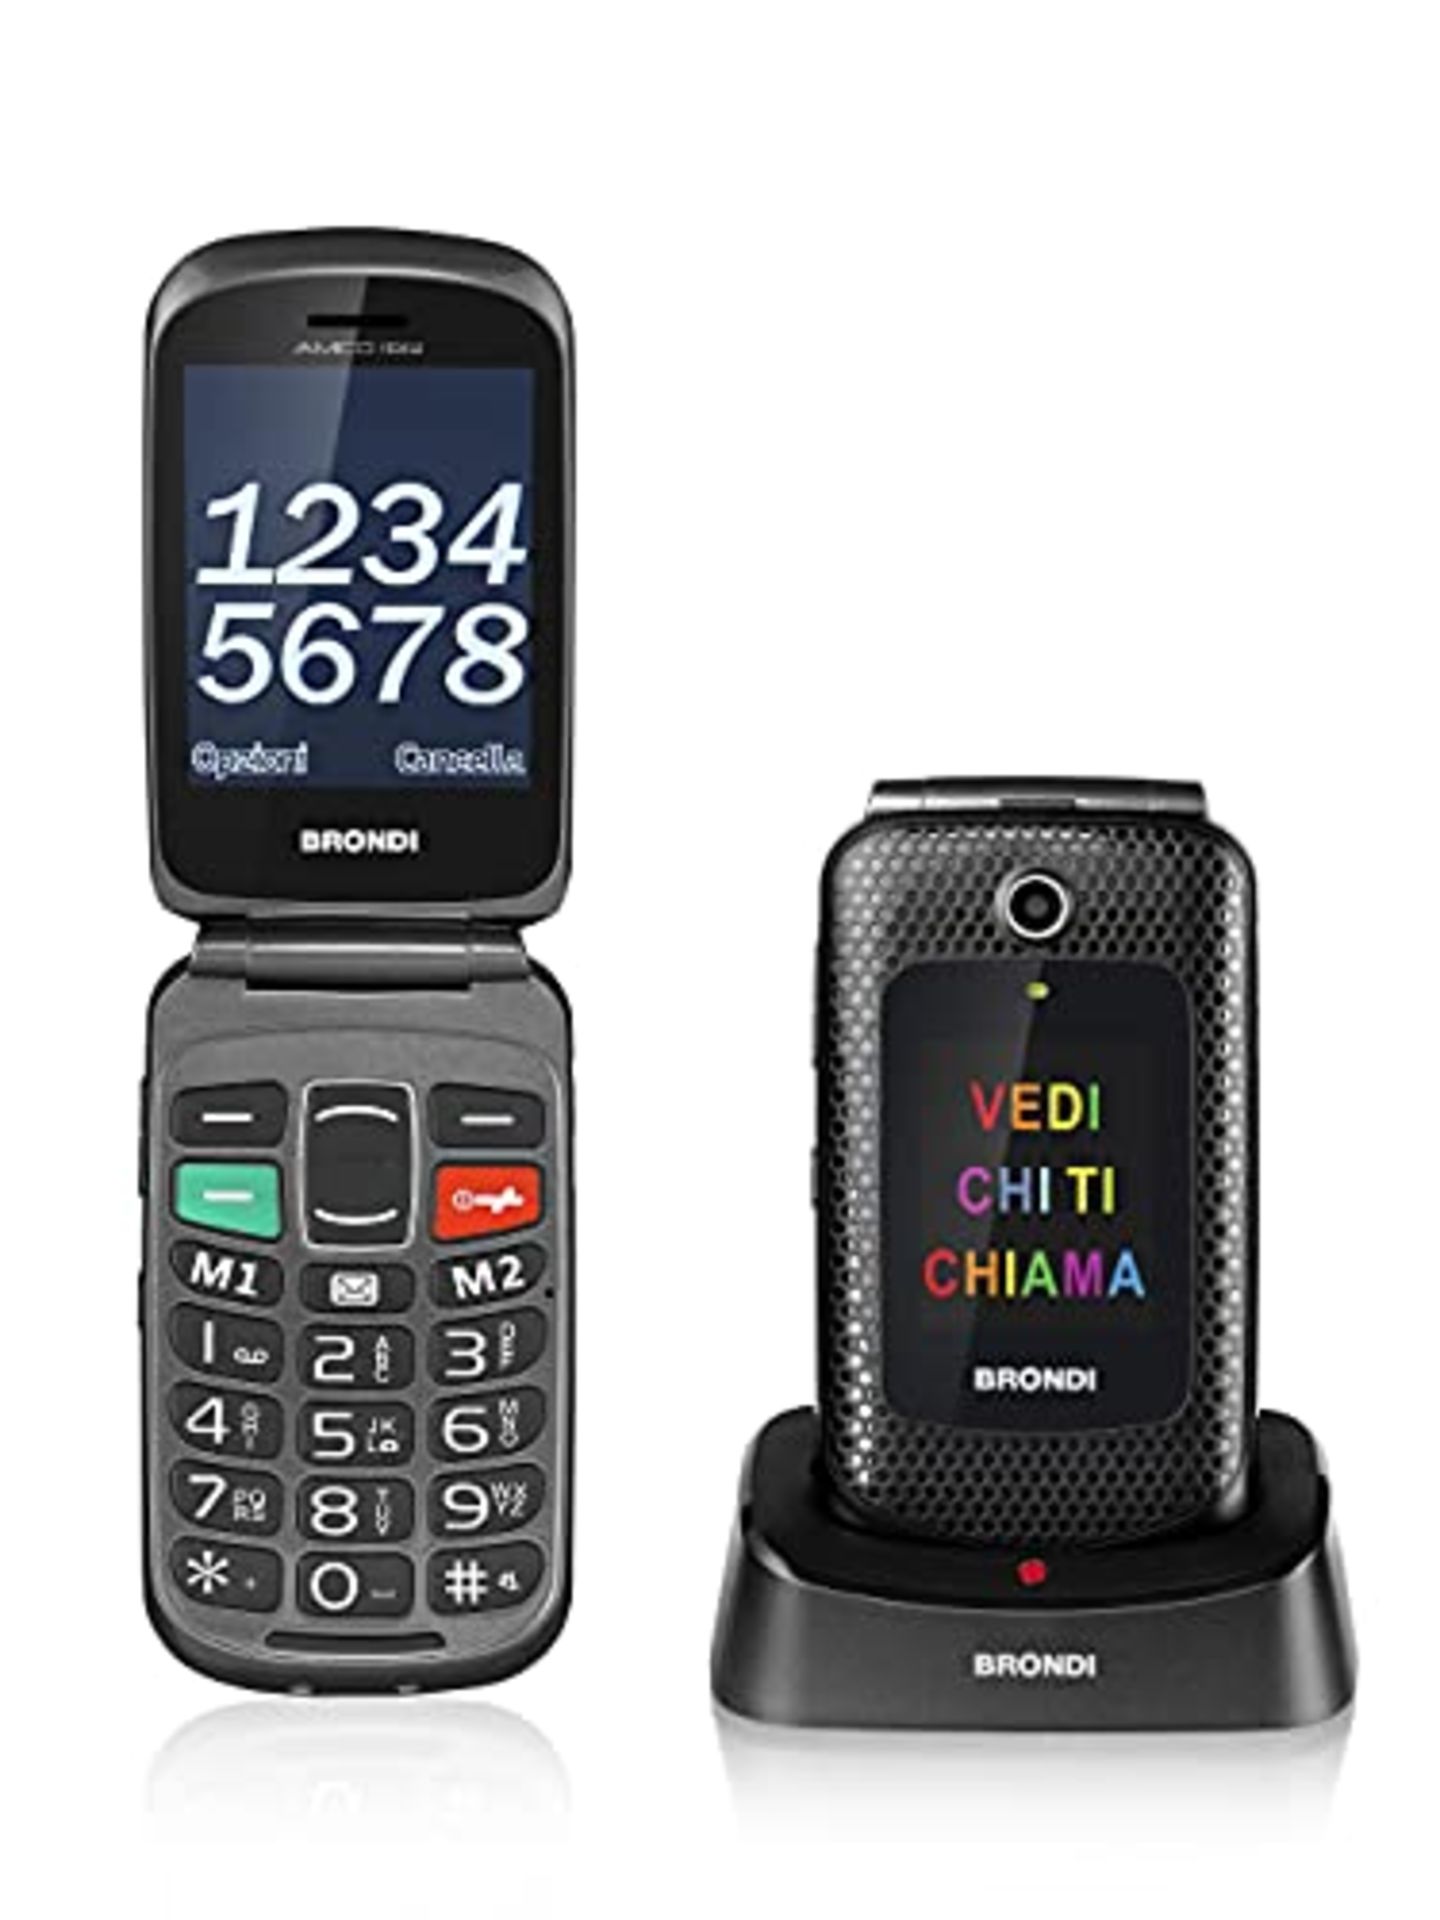 RRP £65.00 Brondi Amico Fedele, GSM mobile phone for the elderly with large buttons, SOS button a